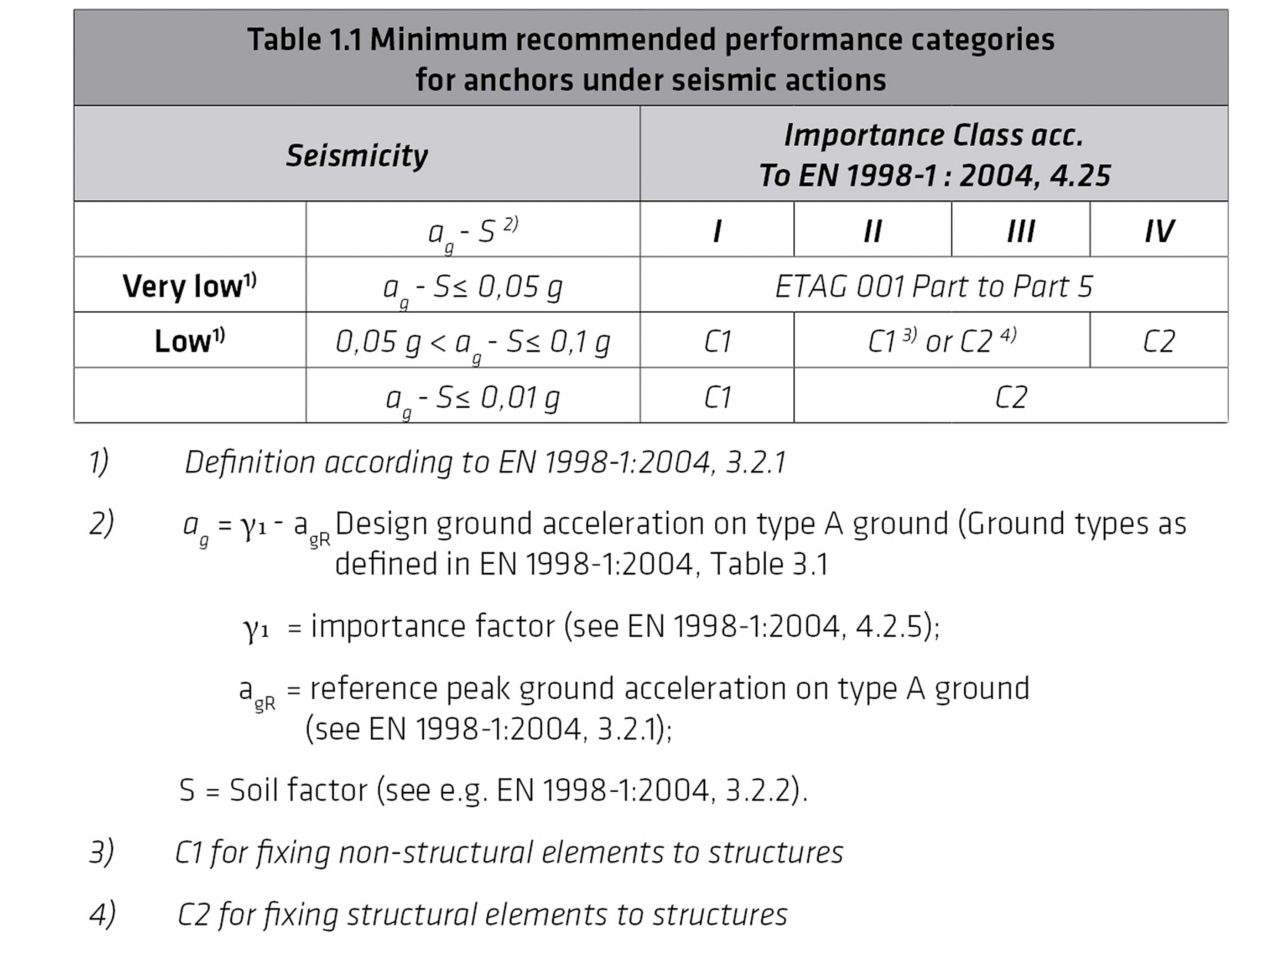 NZ Minimum recommended performance categories for anchors under seismic actions